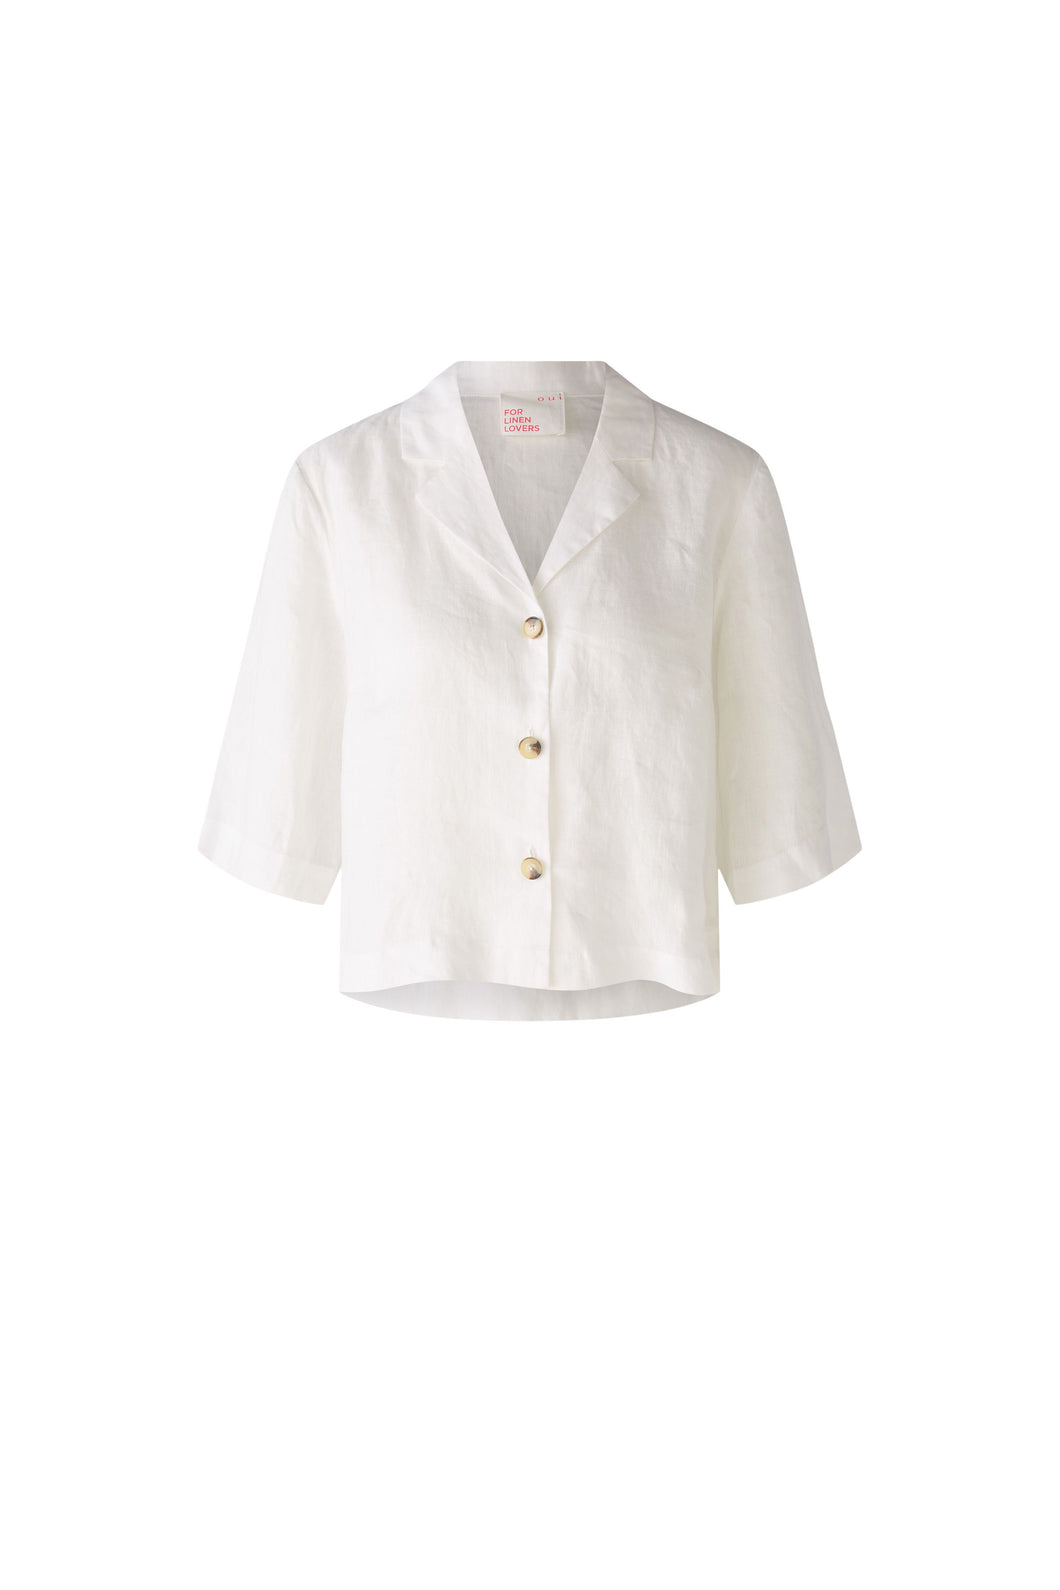 Oui - Blouse Pure Linen in White